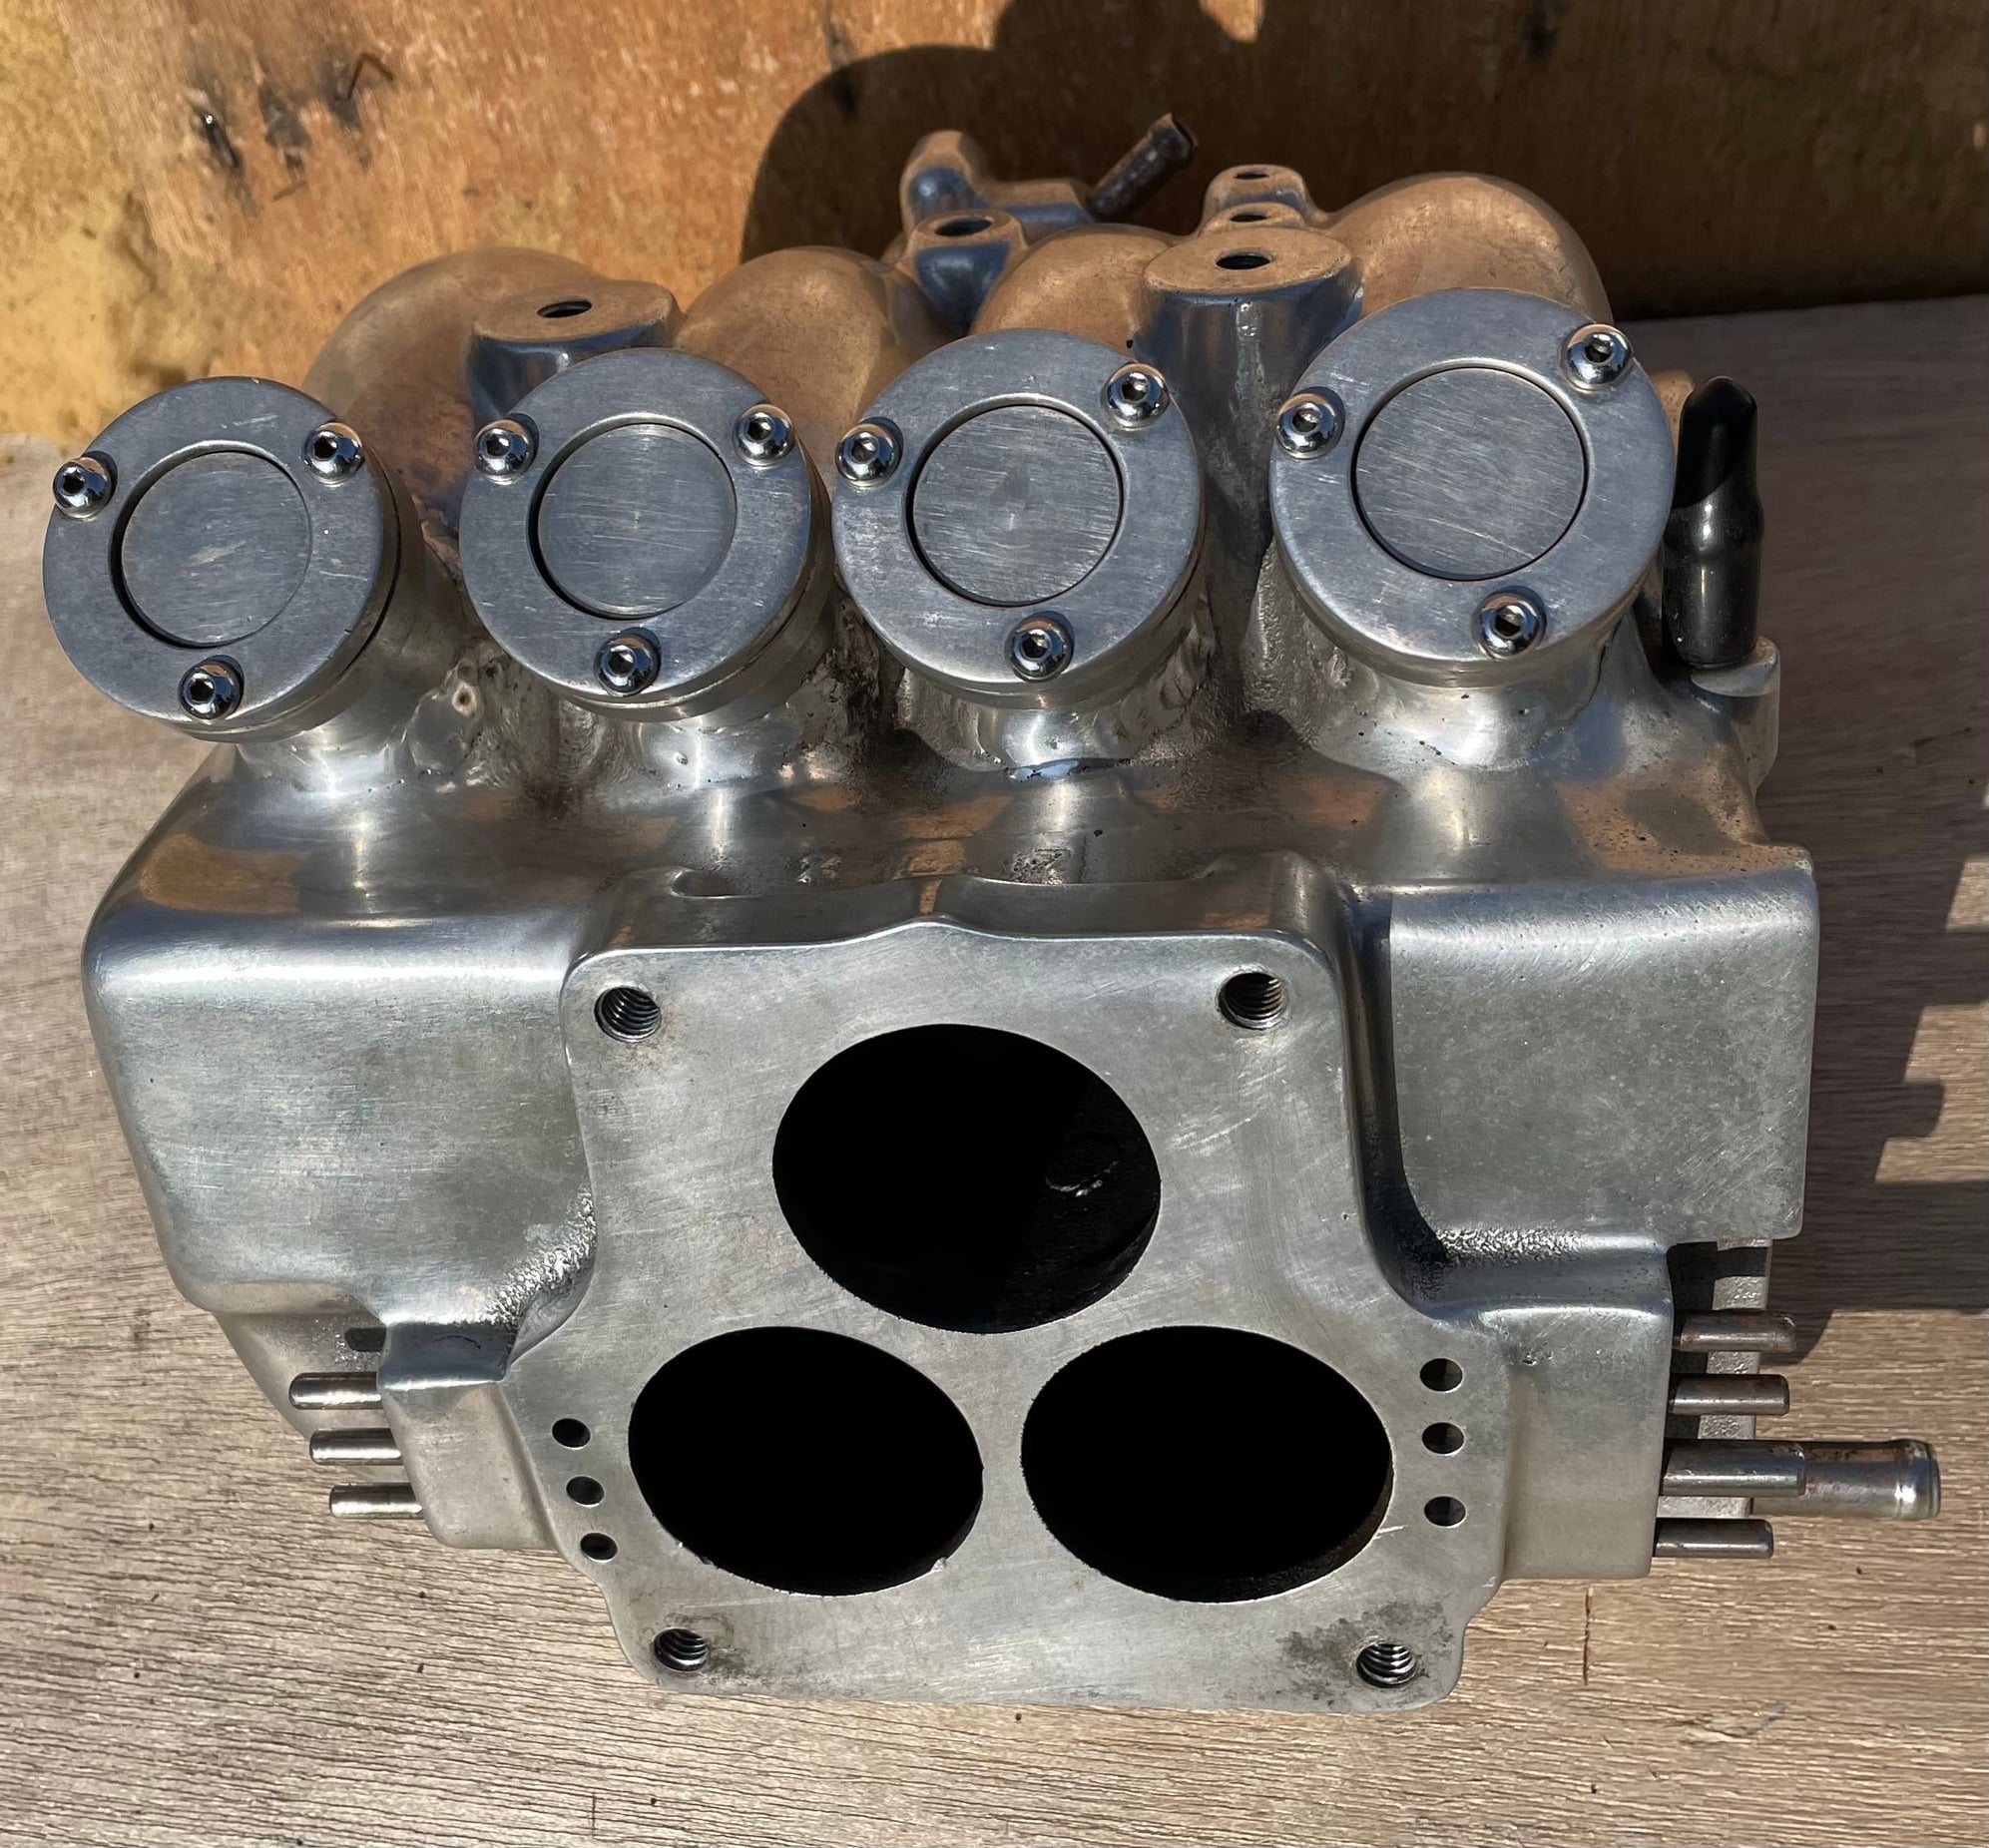 Engine - Intake/Fuel - S4 Turbo II UIM Polished Upper Intake Manifold with 4 Extra Fuel Injector Bungs - Used - Chicago, IL 60641, United States